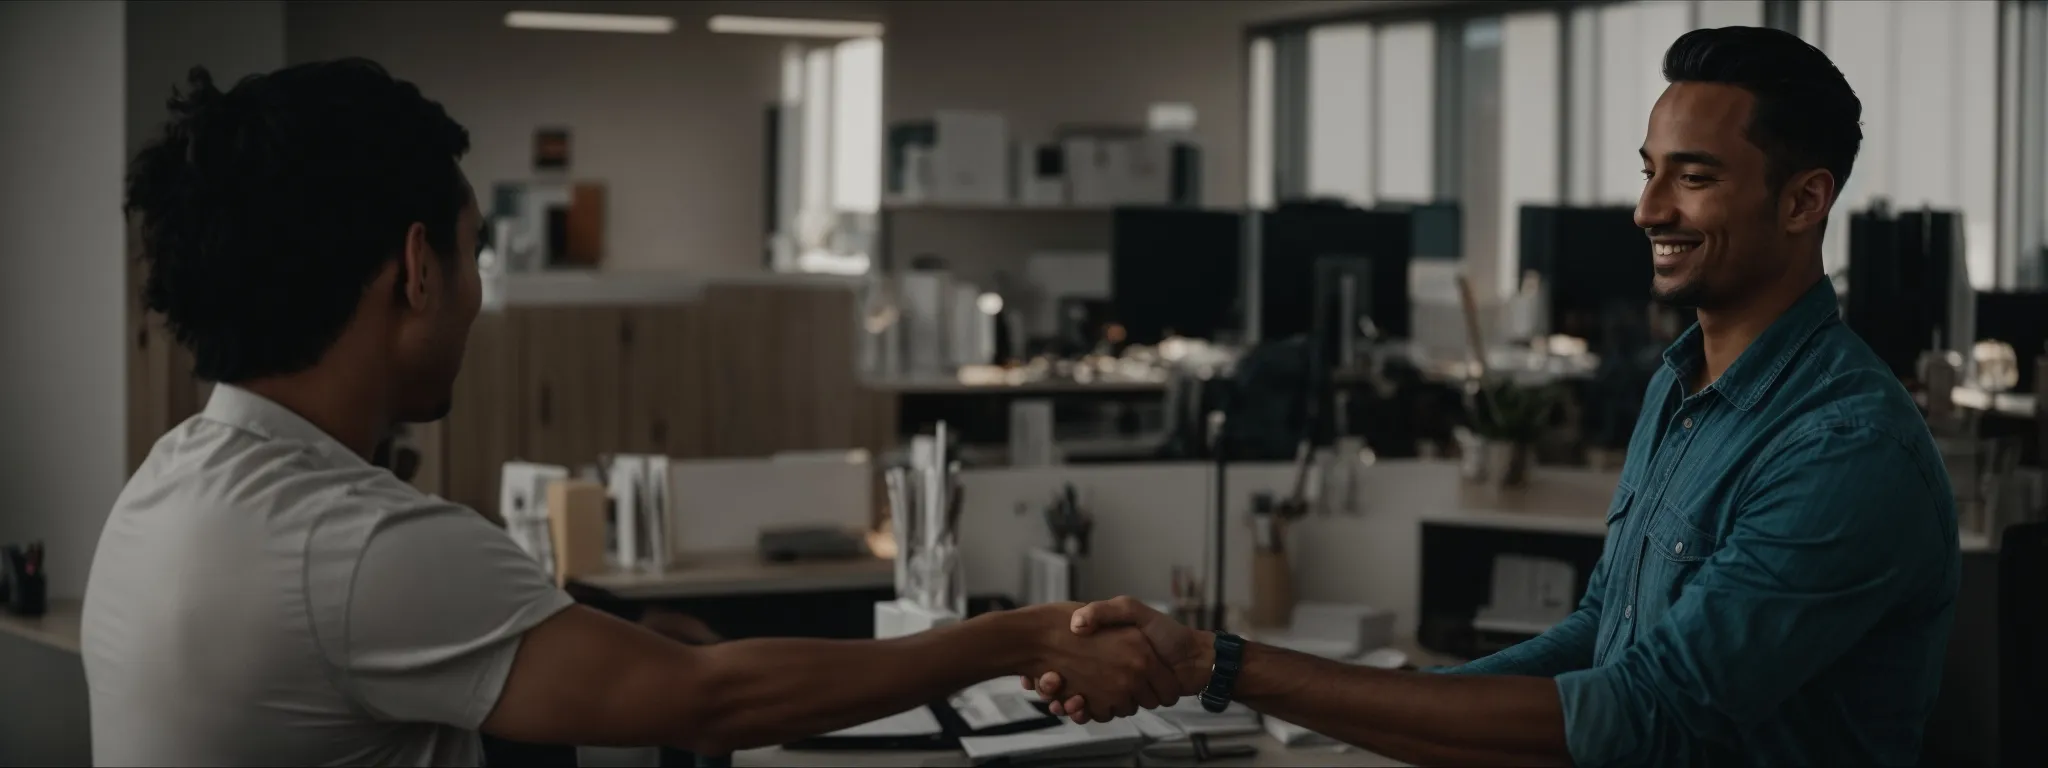 two professionals shake hands in a well-lit office, symbolizing a partnership agreement.